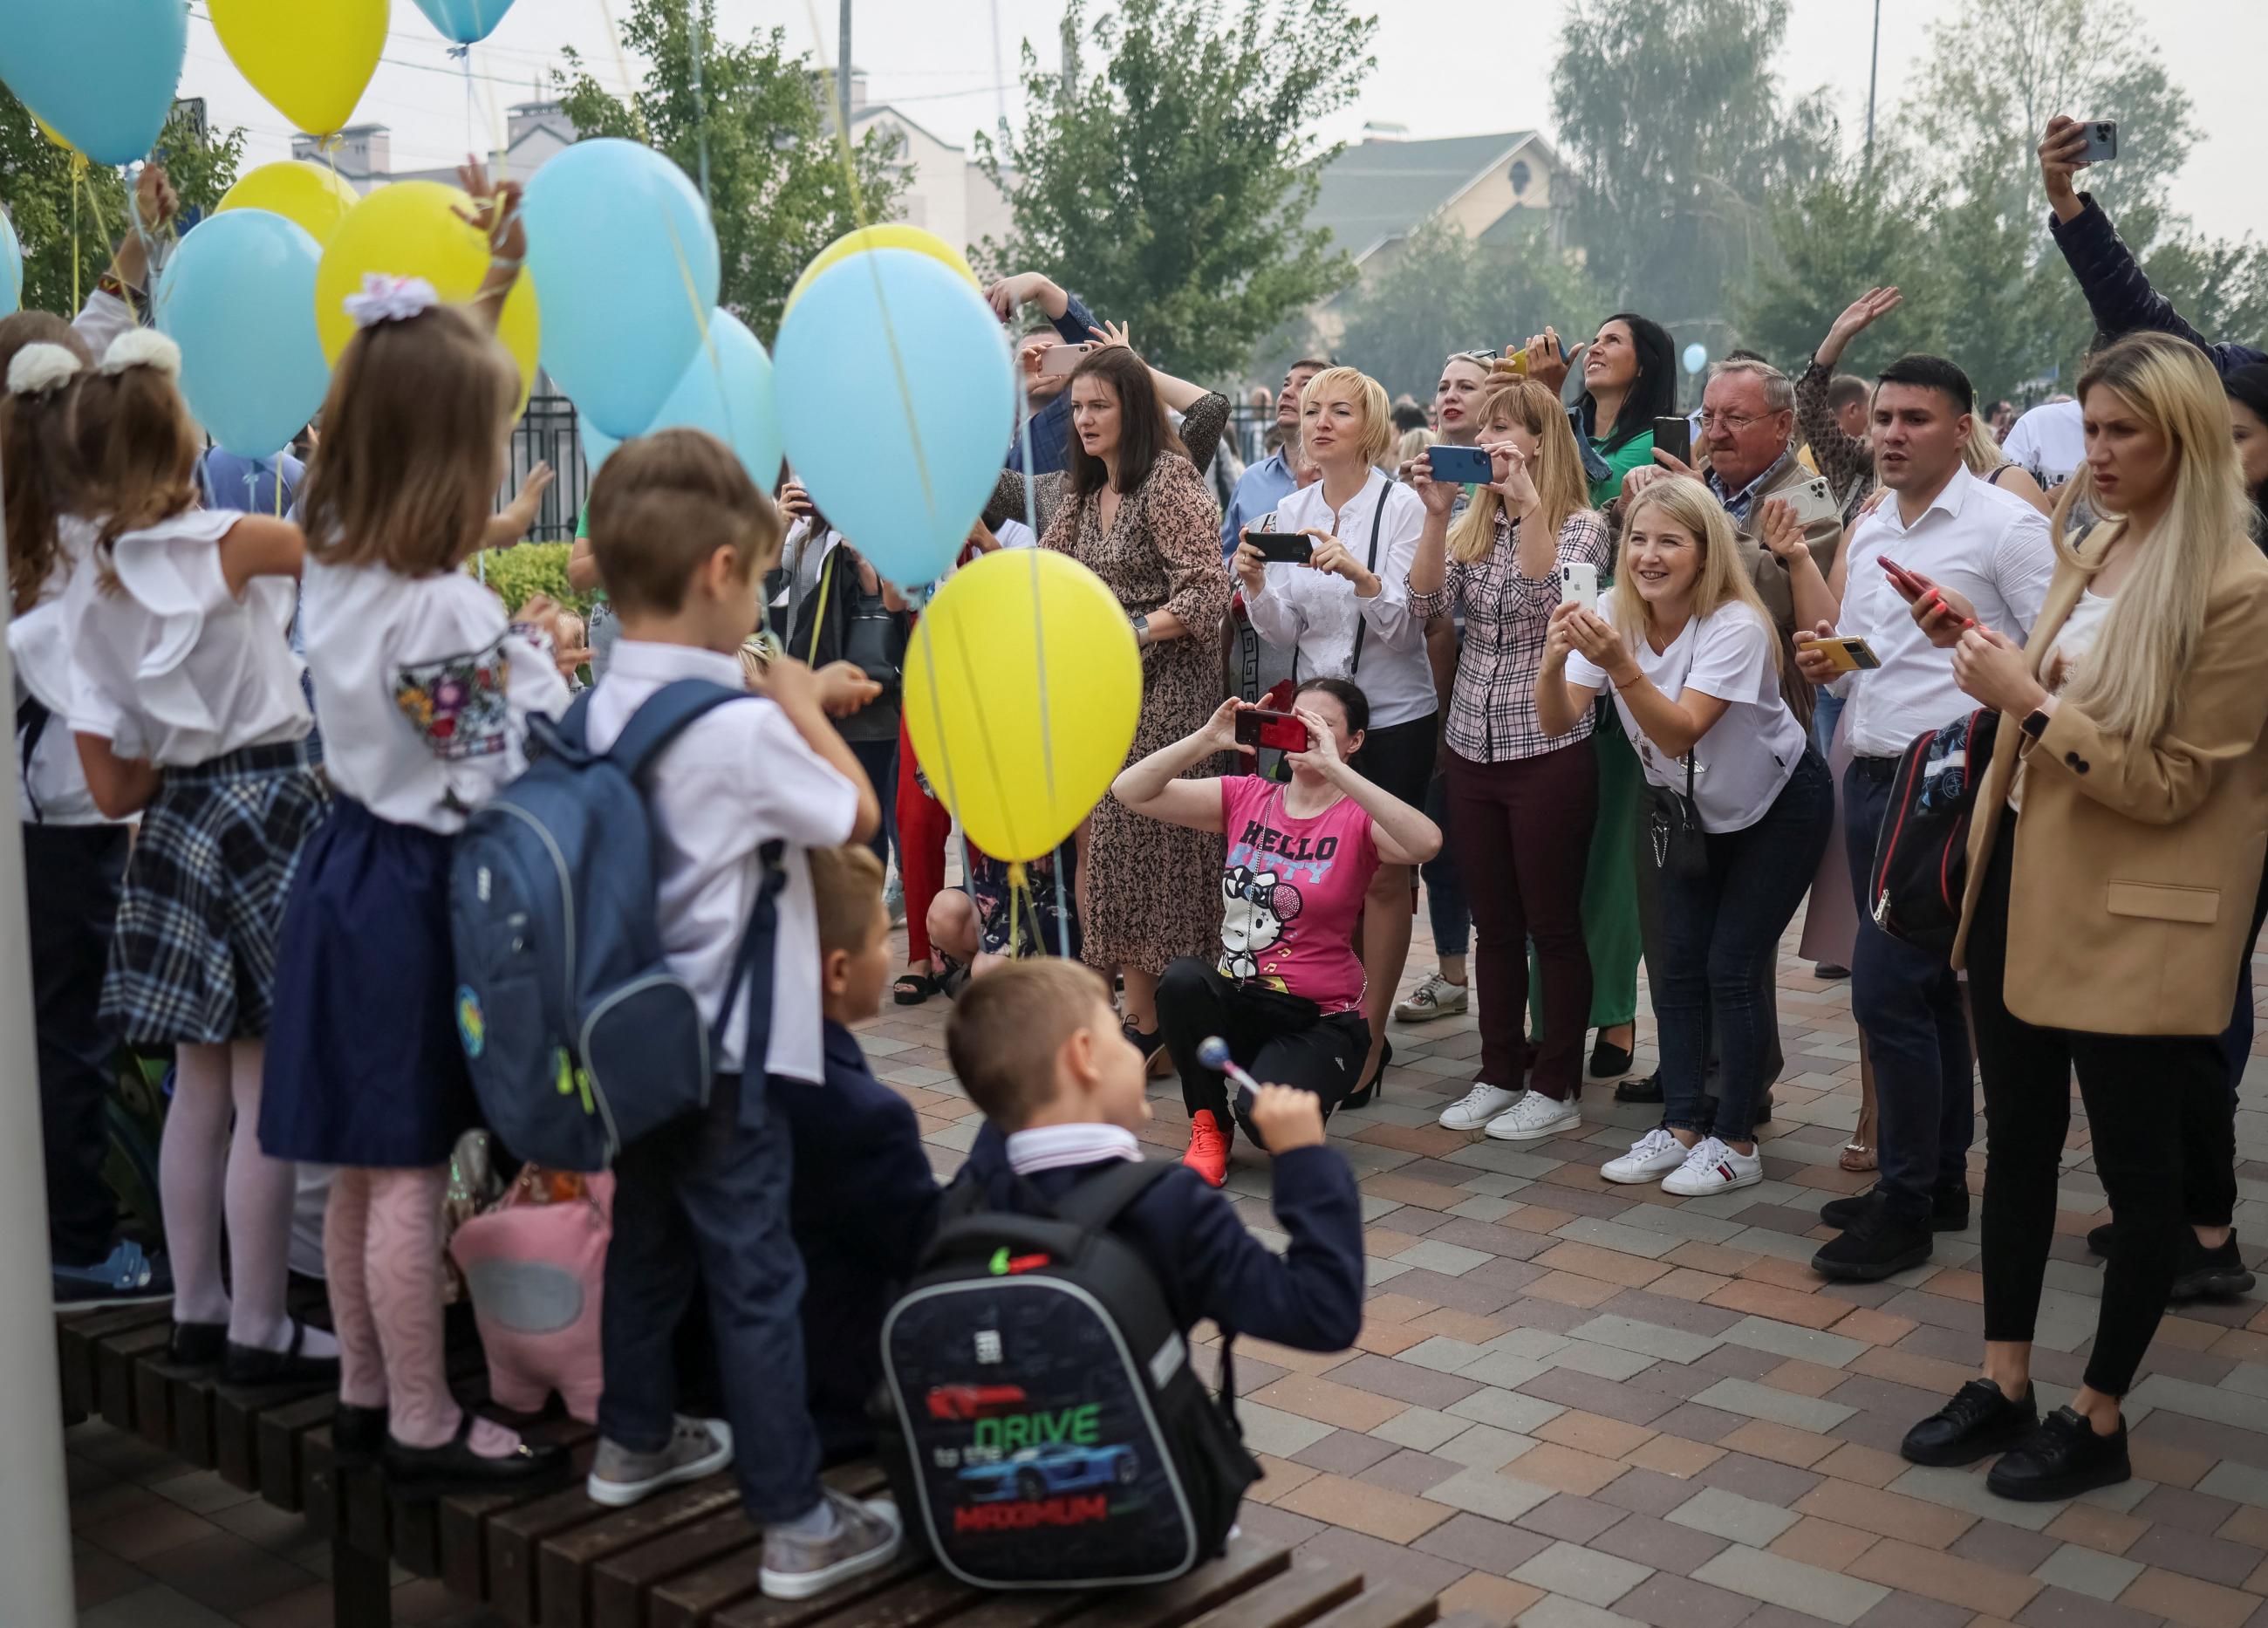 Parents with smartphones take pictures of their elementary-school-aged children, who are wearing school uniforms and backpacks and holding blue and yellow balloons during a ceremony to mark the start of the school year. The children have their backs to the camera, but are posing happily for their smiling parents.